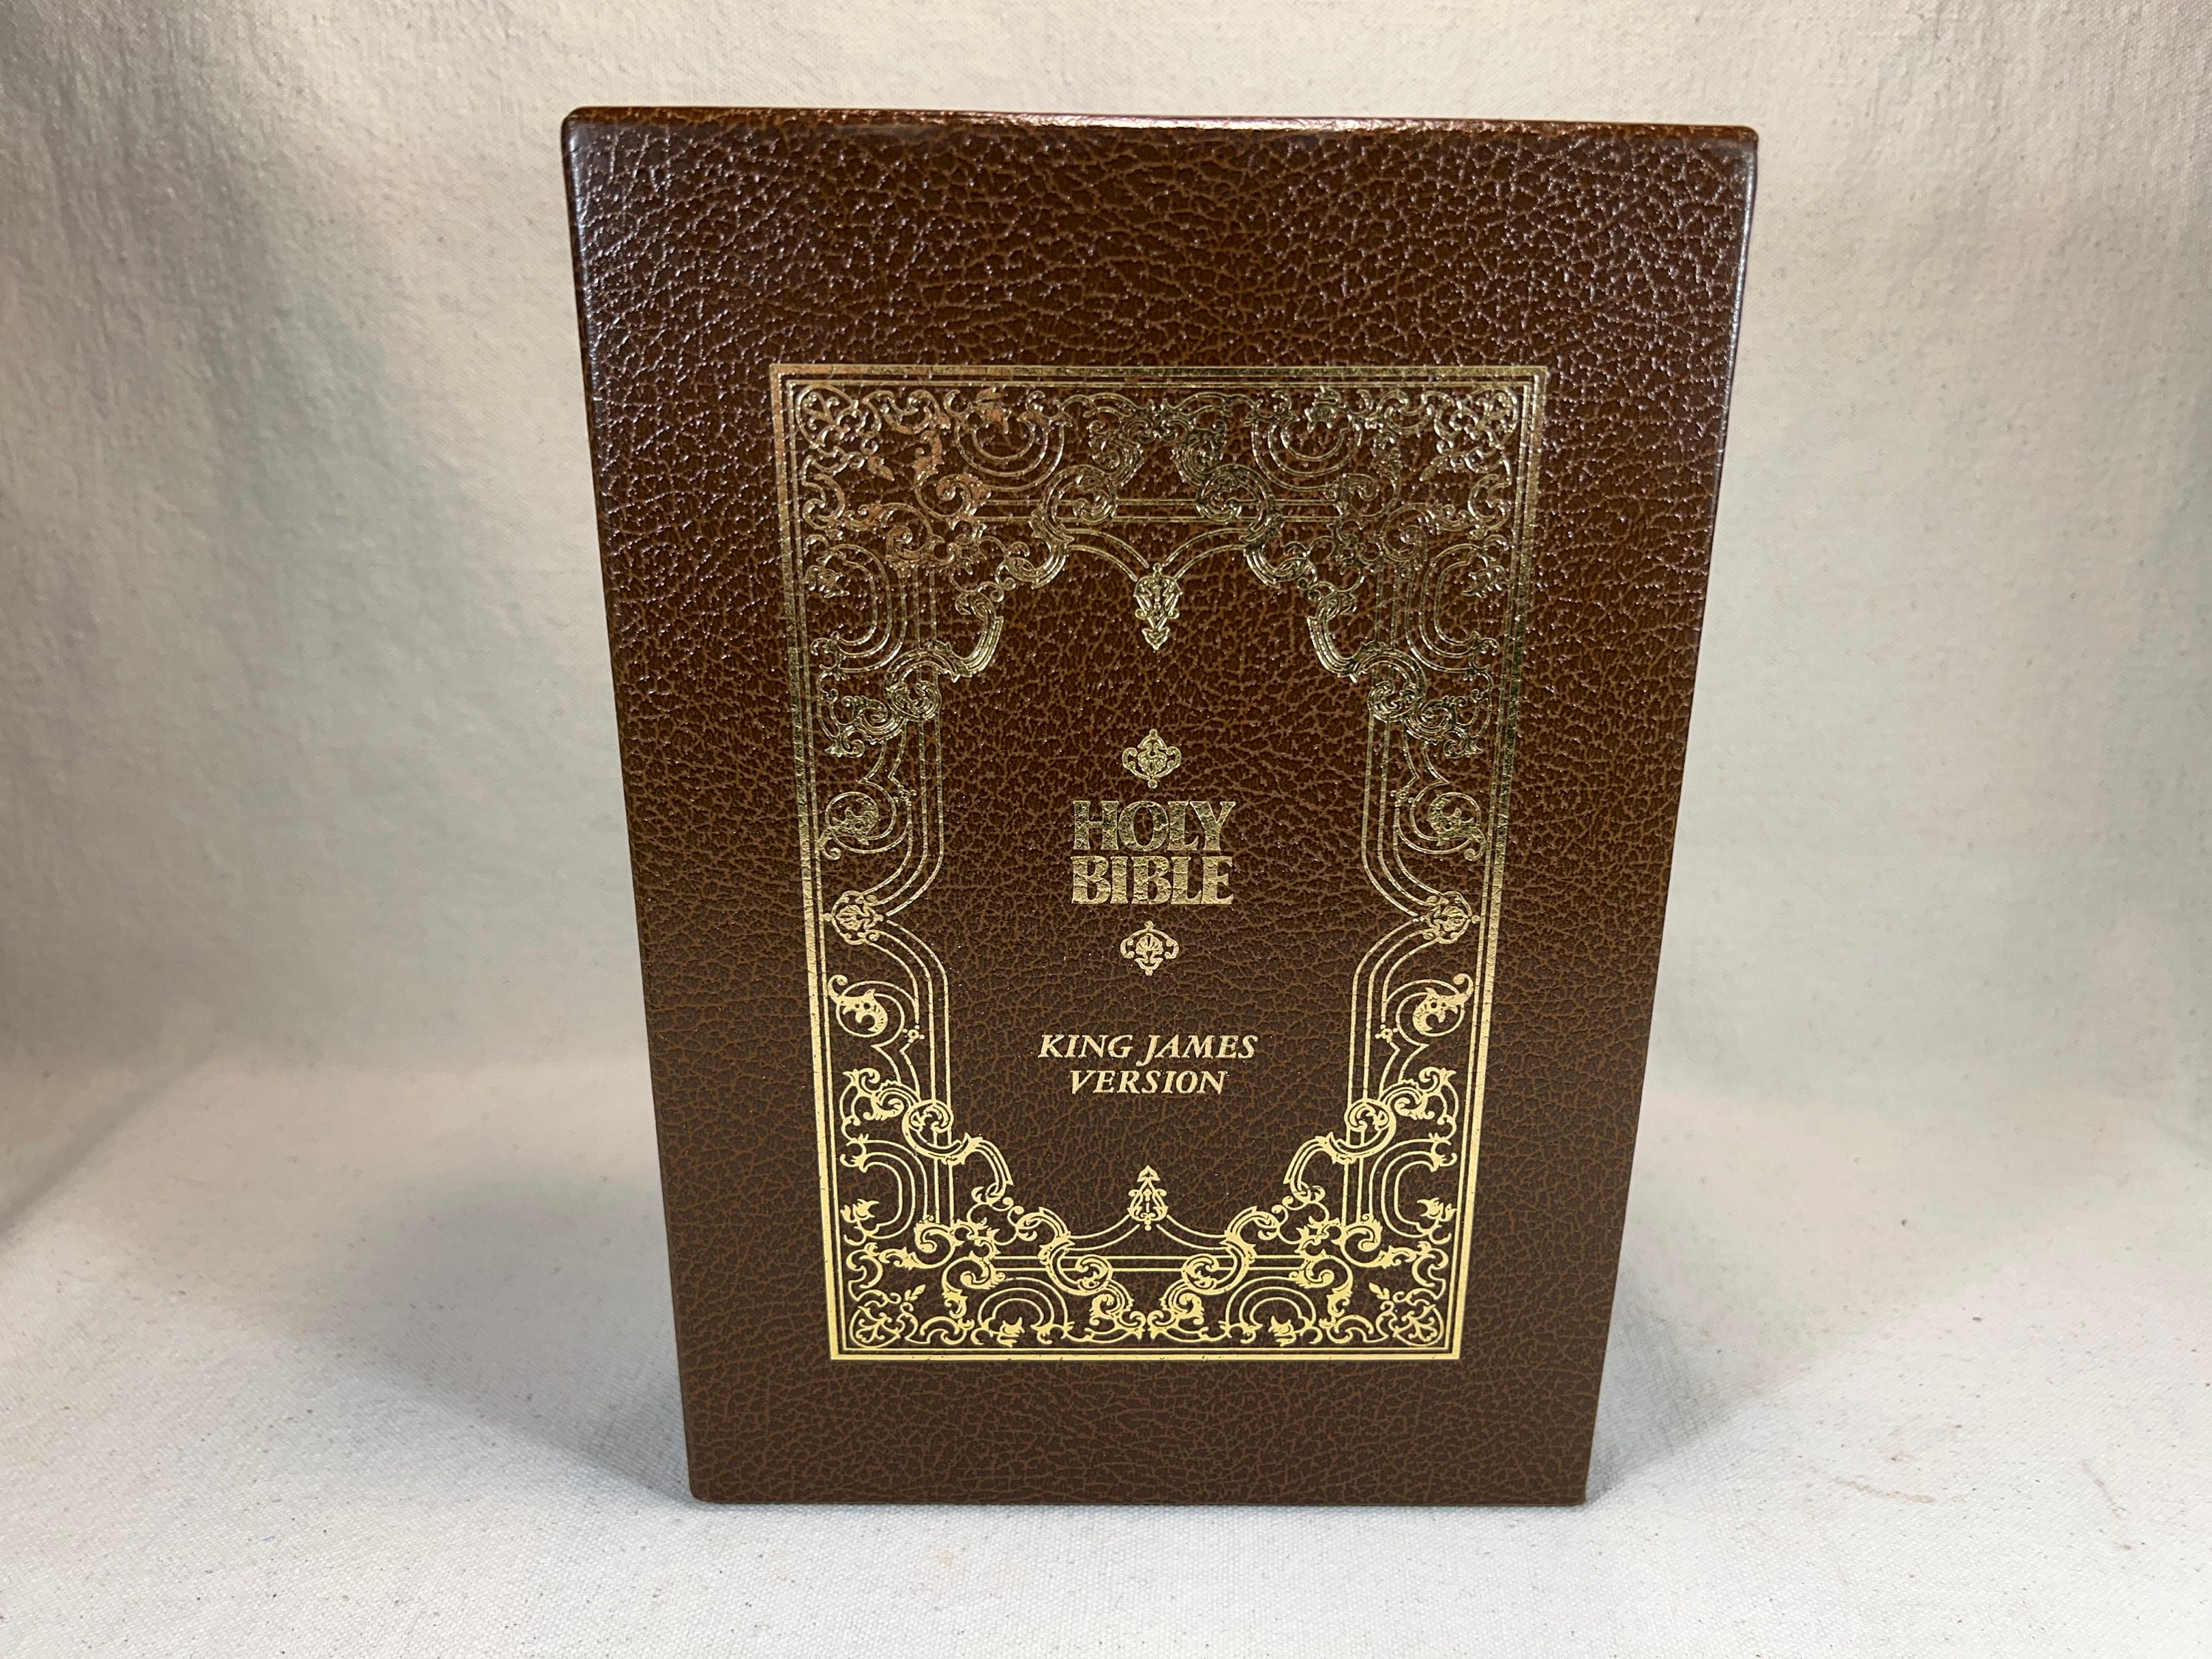 Holy Bible: King James Version (Barnes & Noble Collectible Editions) by  Gustave Dore, Hardcover